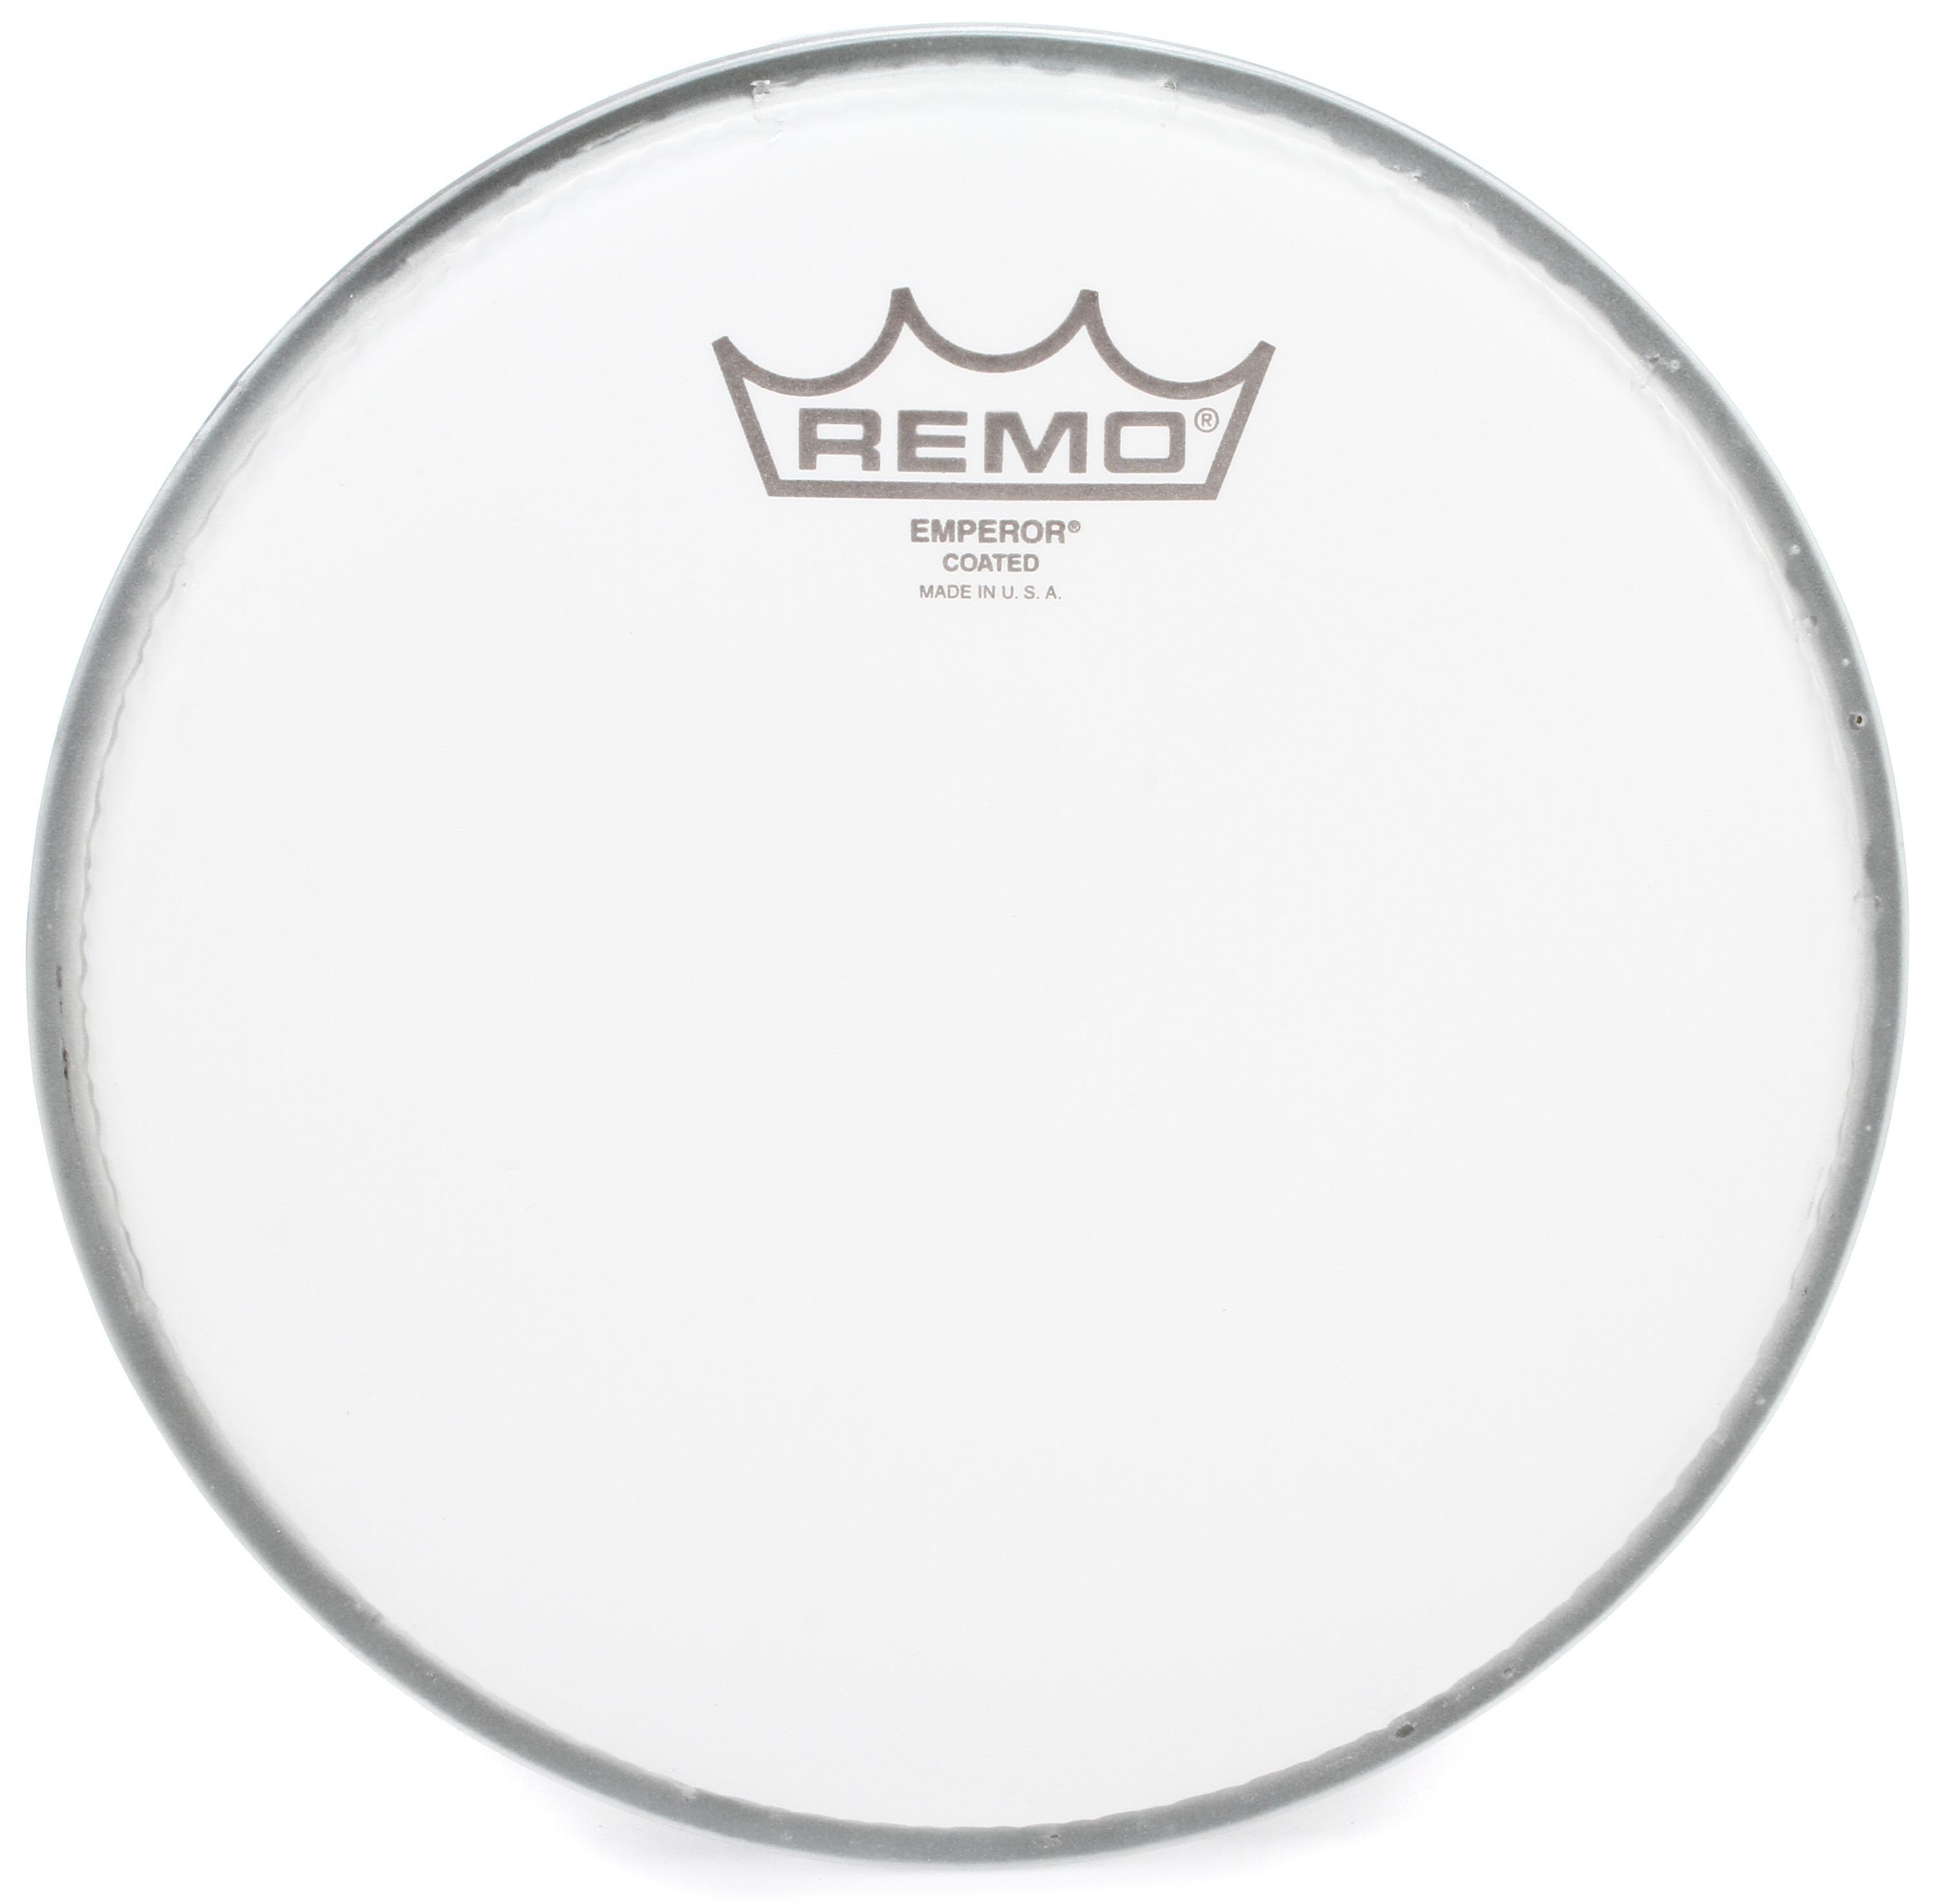 Bundled Item: Remo Emperor Coated Drumhead - 8 inch